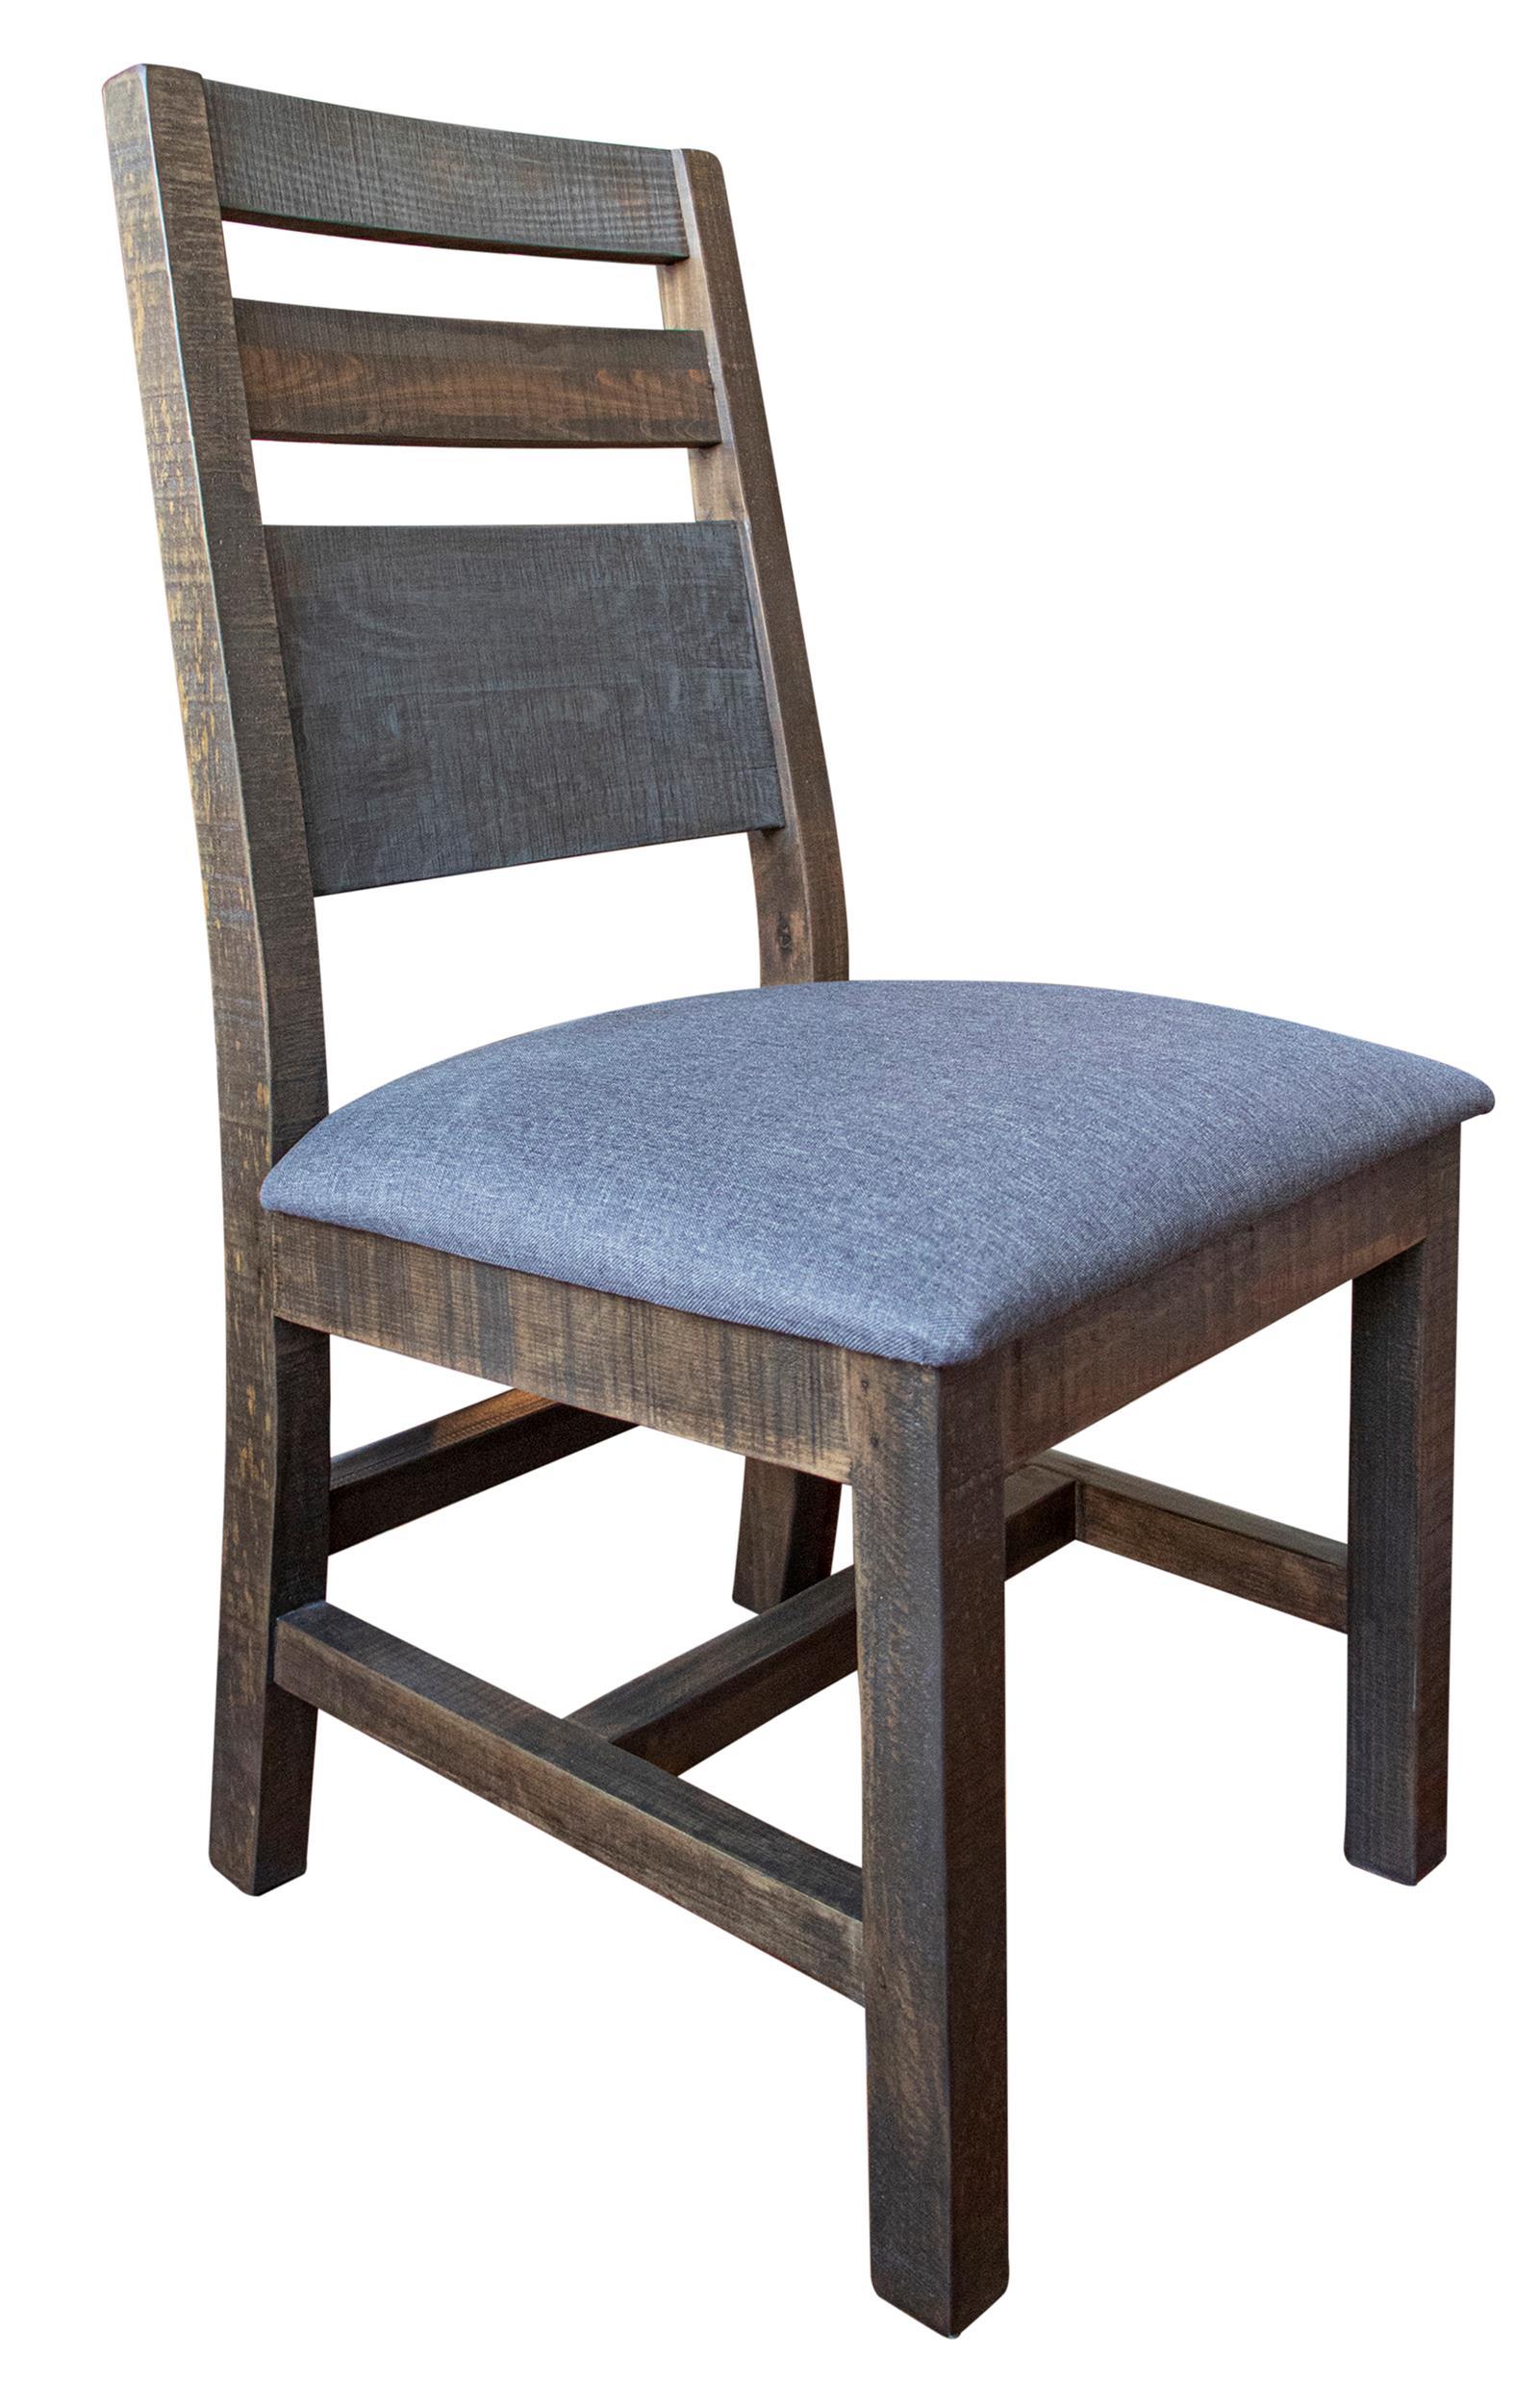 Antique Gray Chair